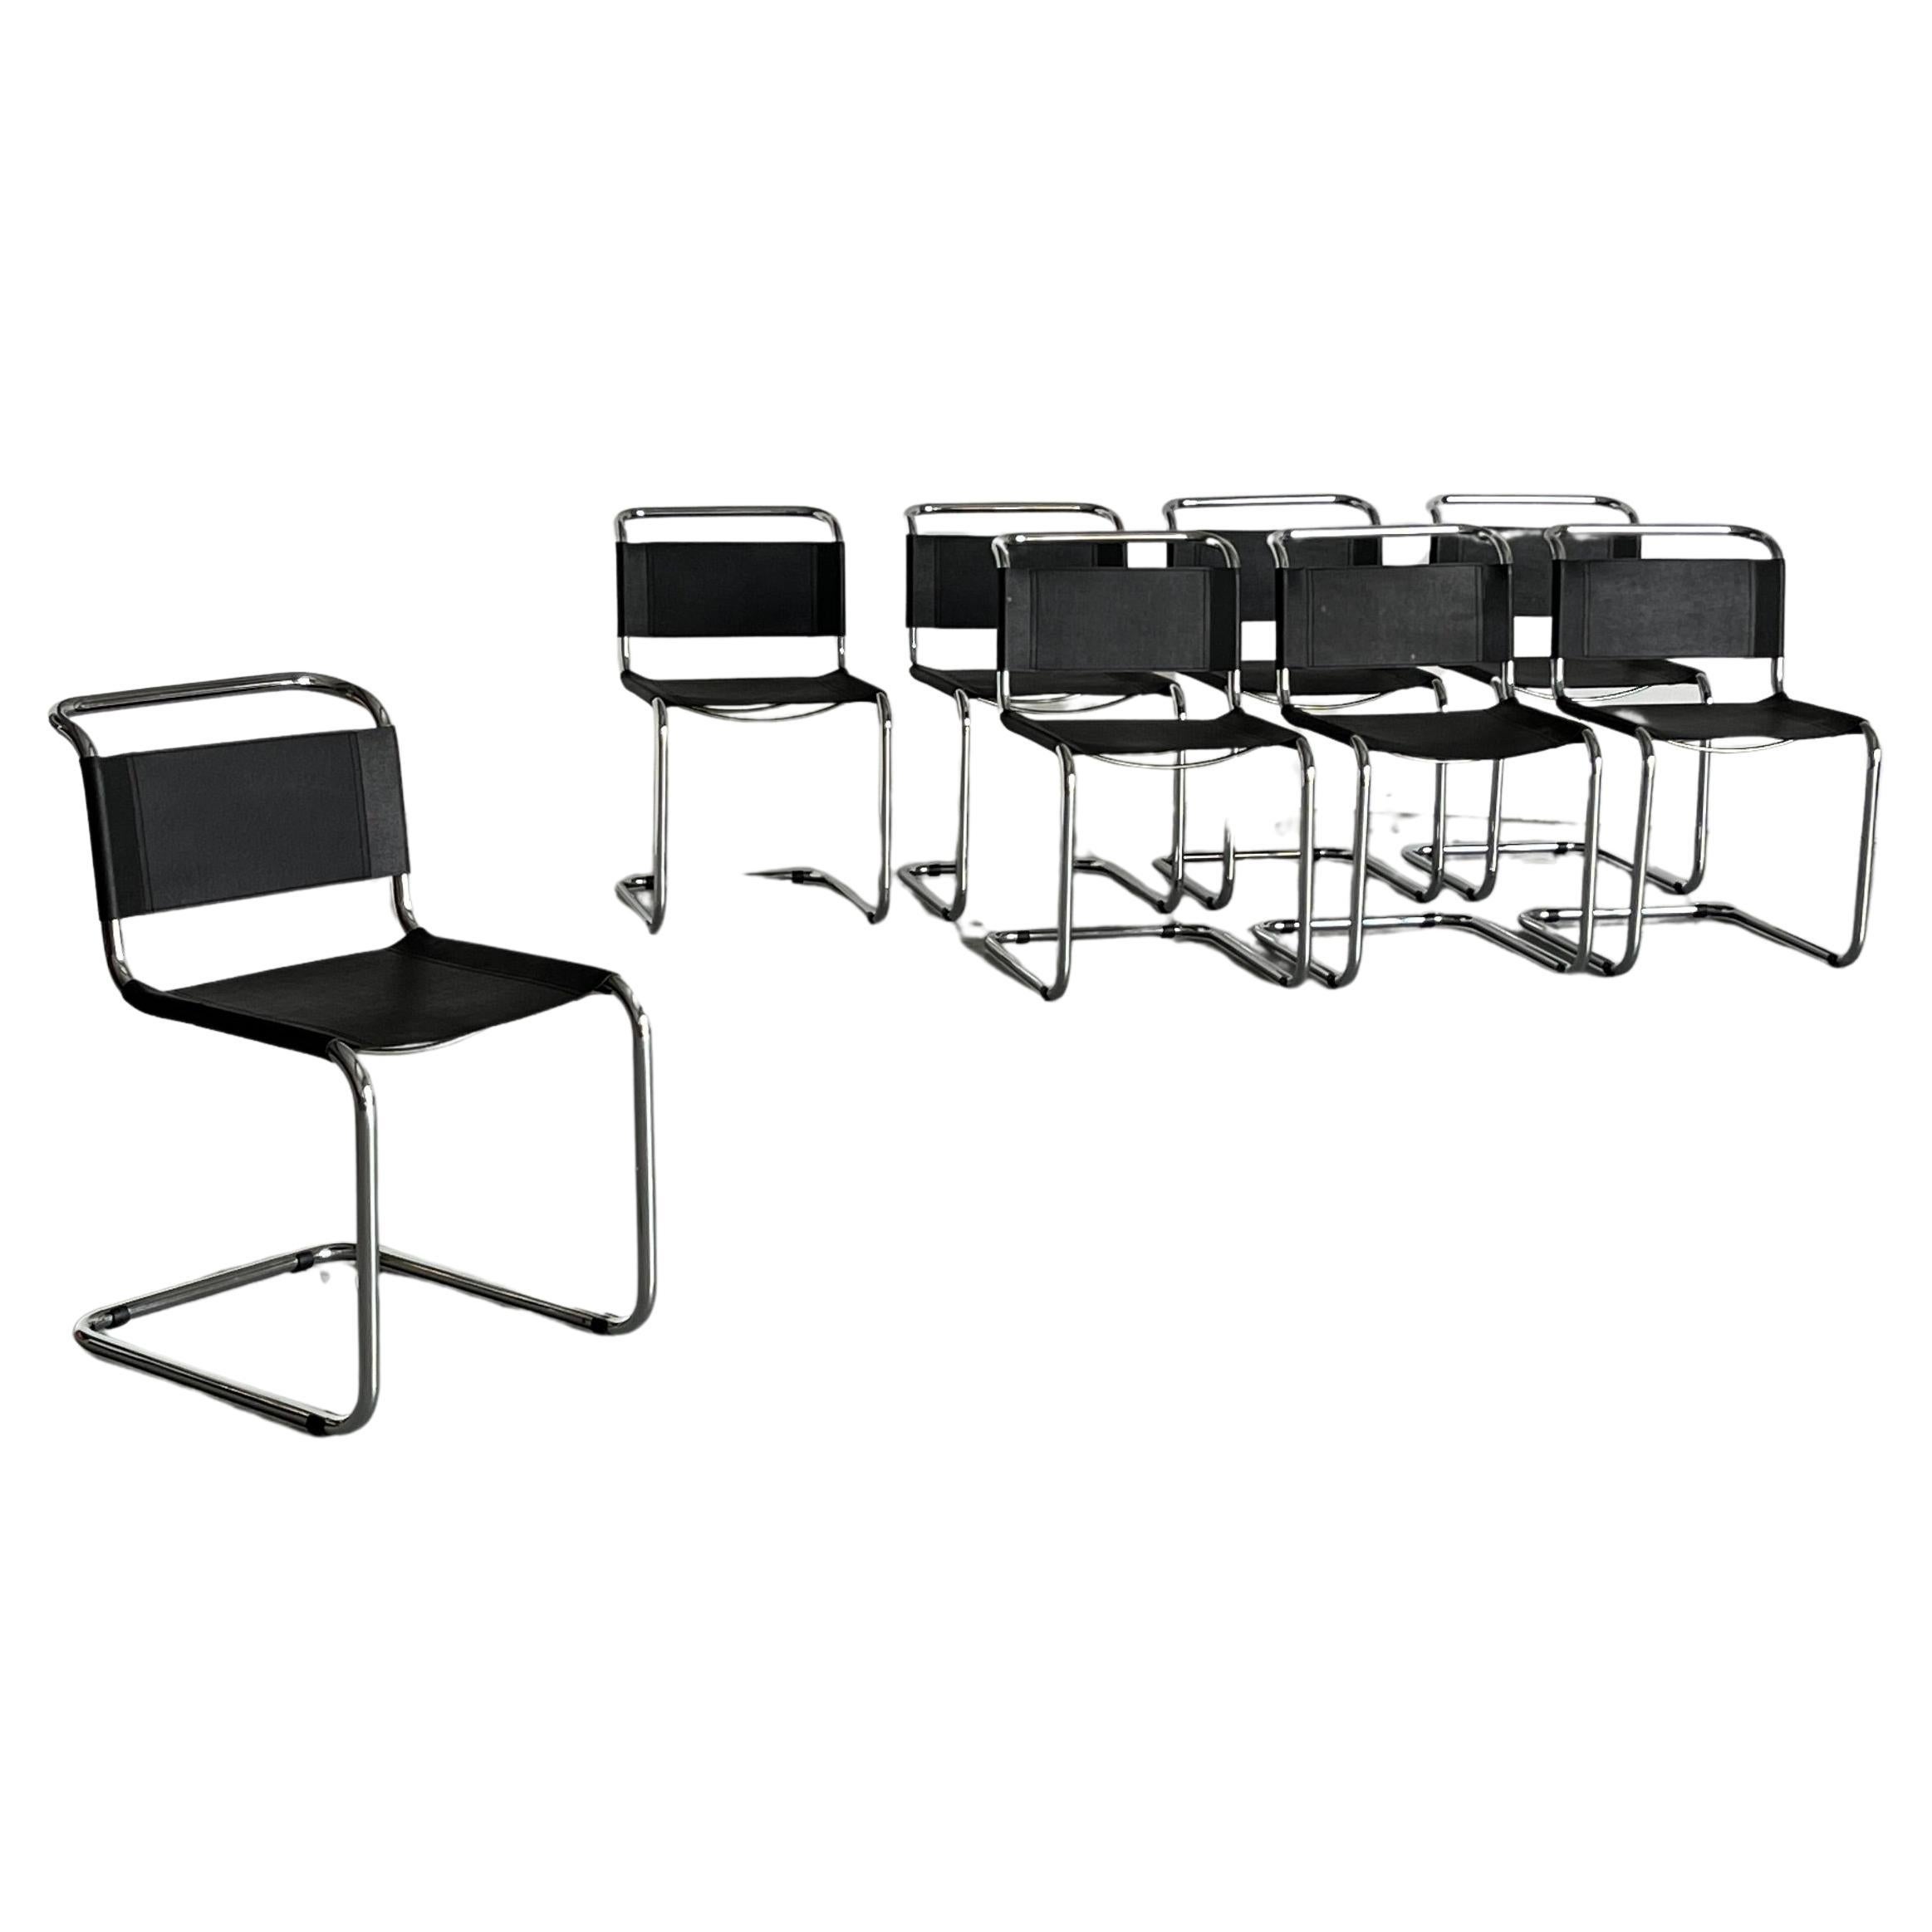 Mart Stam S33 Design Cantilever Tubular Steel and Faux Leather Chairs, 1970s For Sale